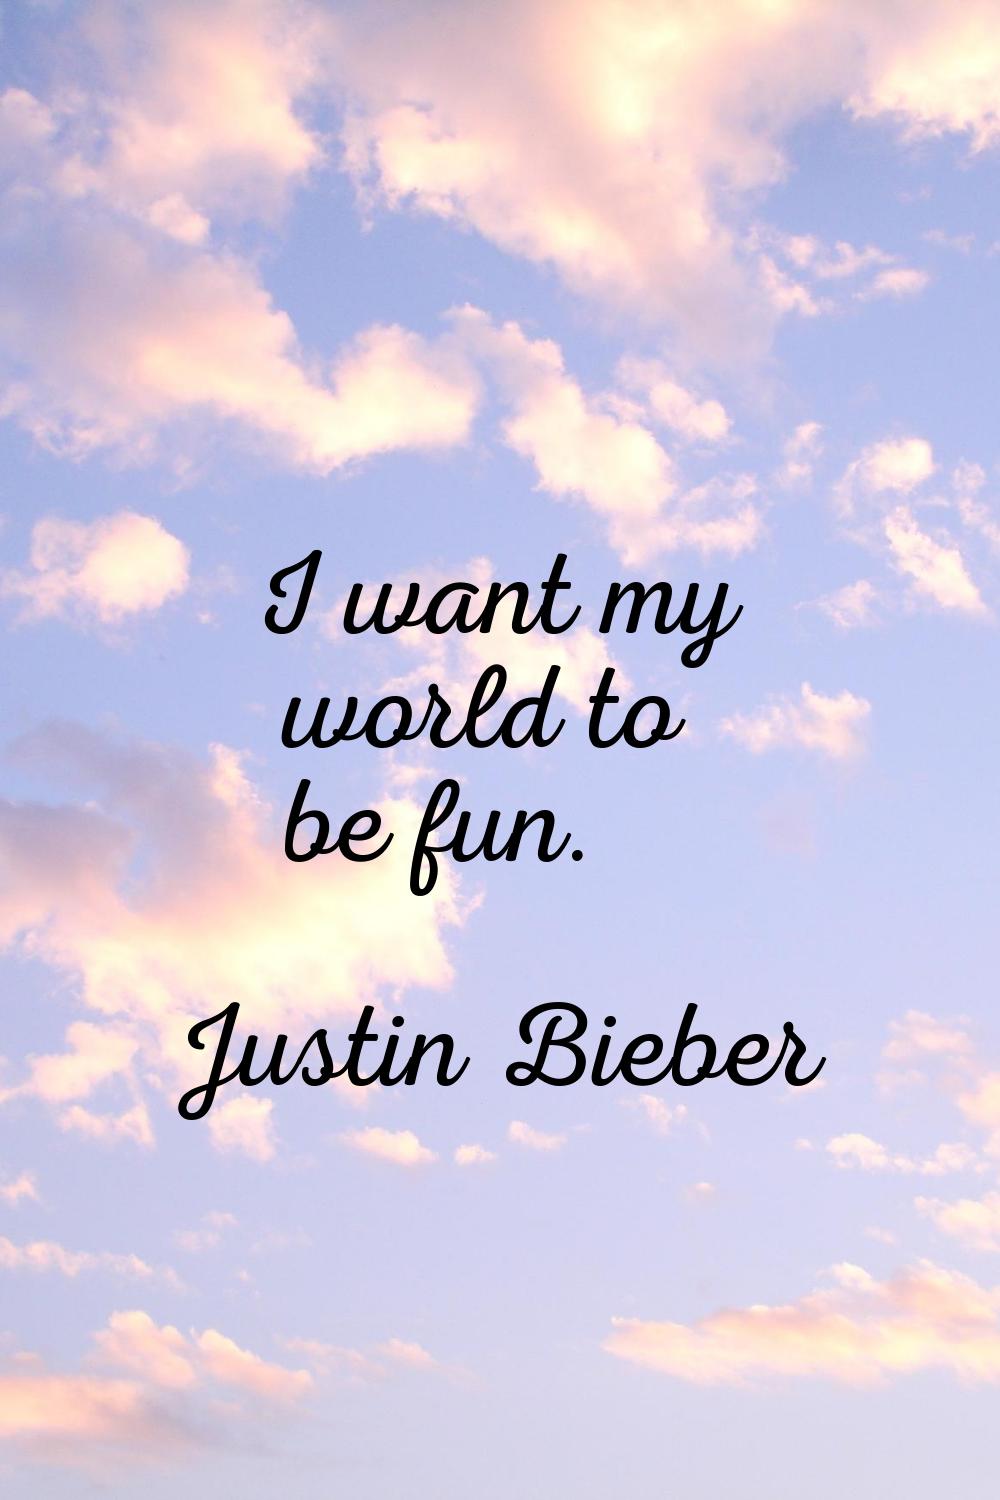 I want my world to be fun.